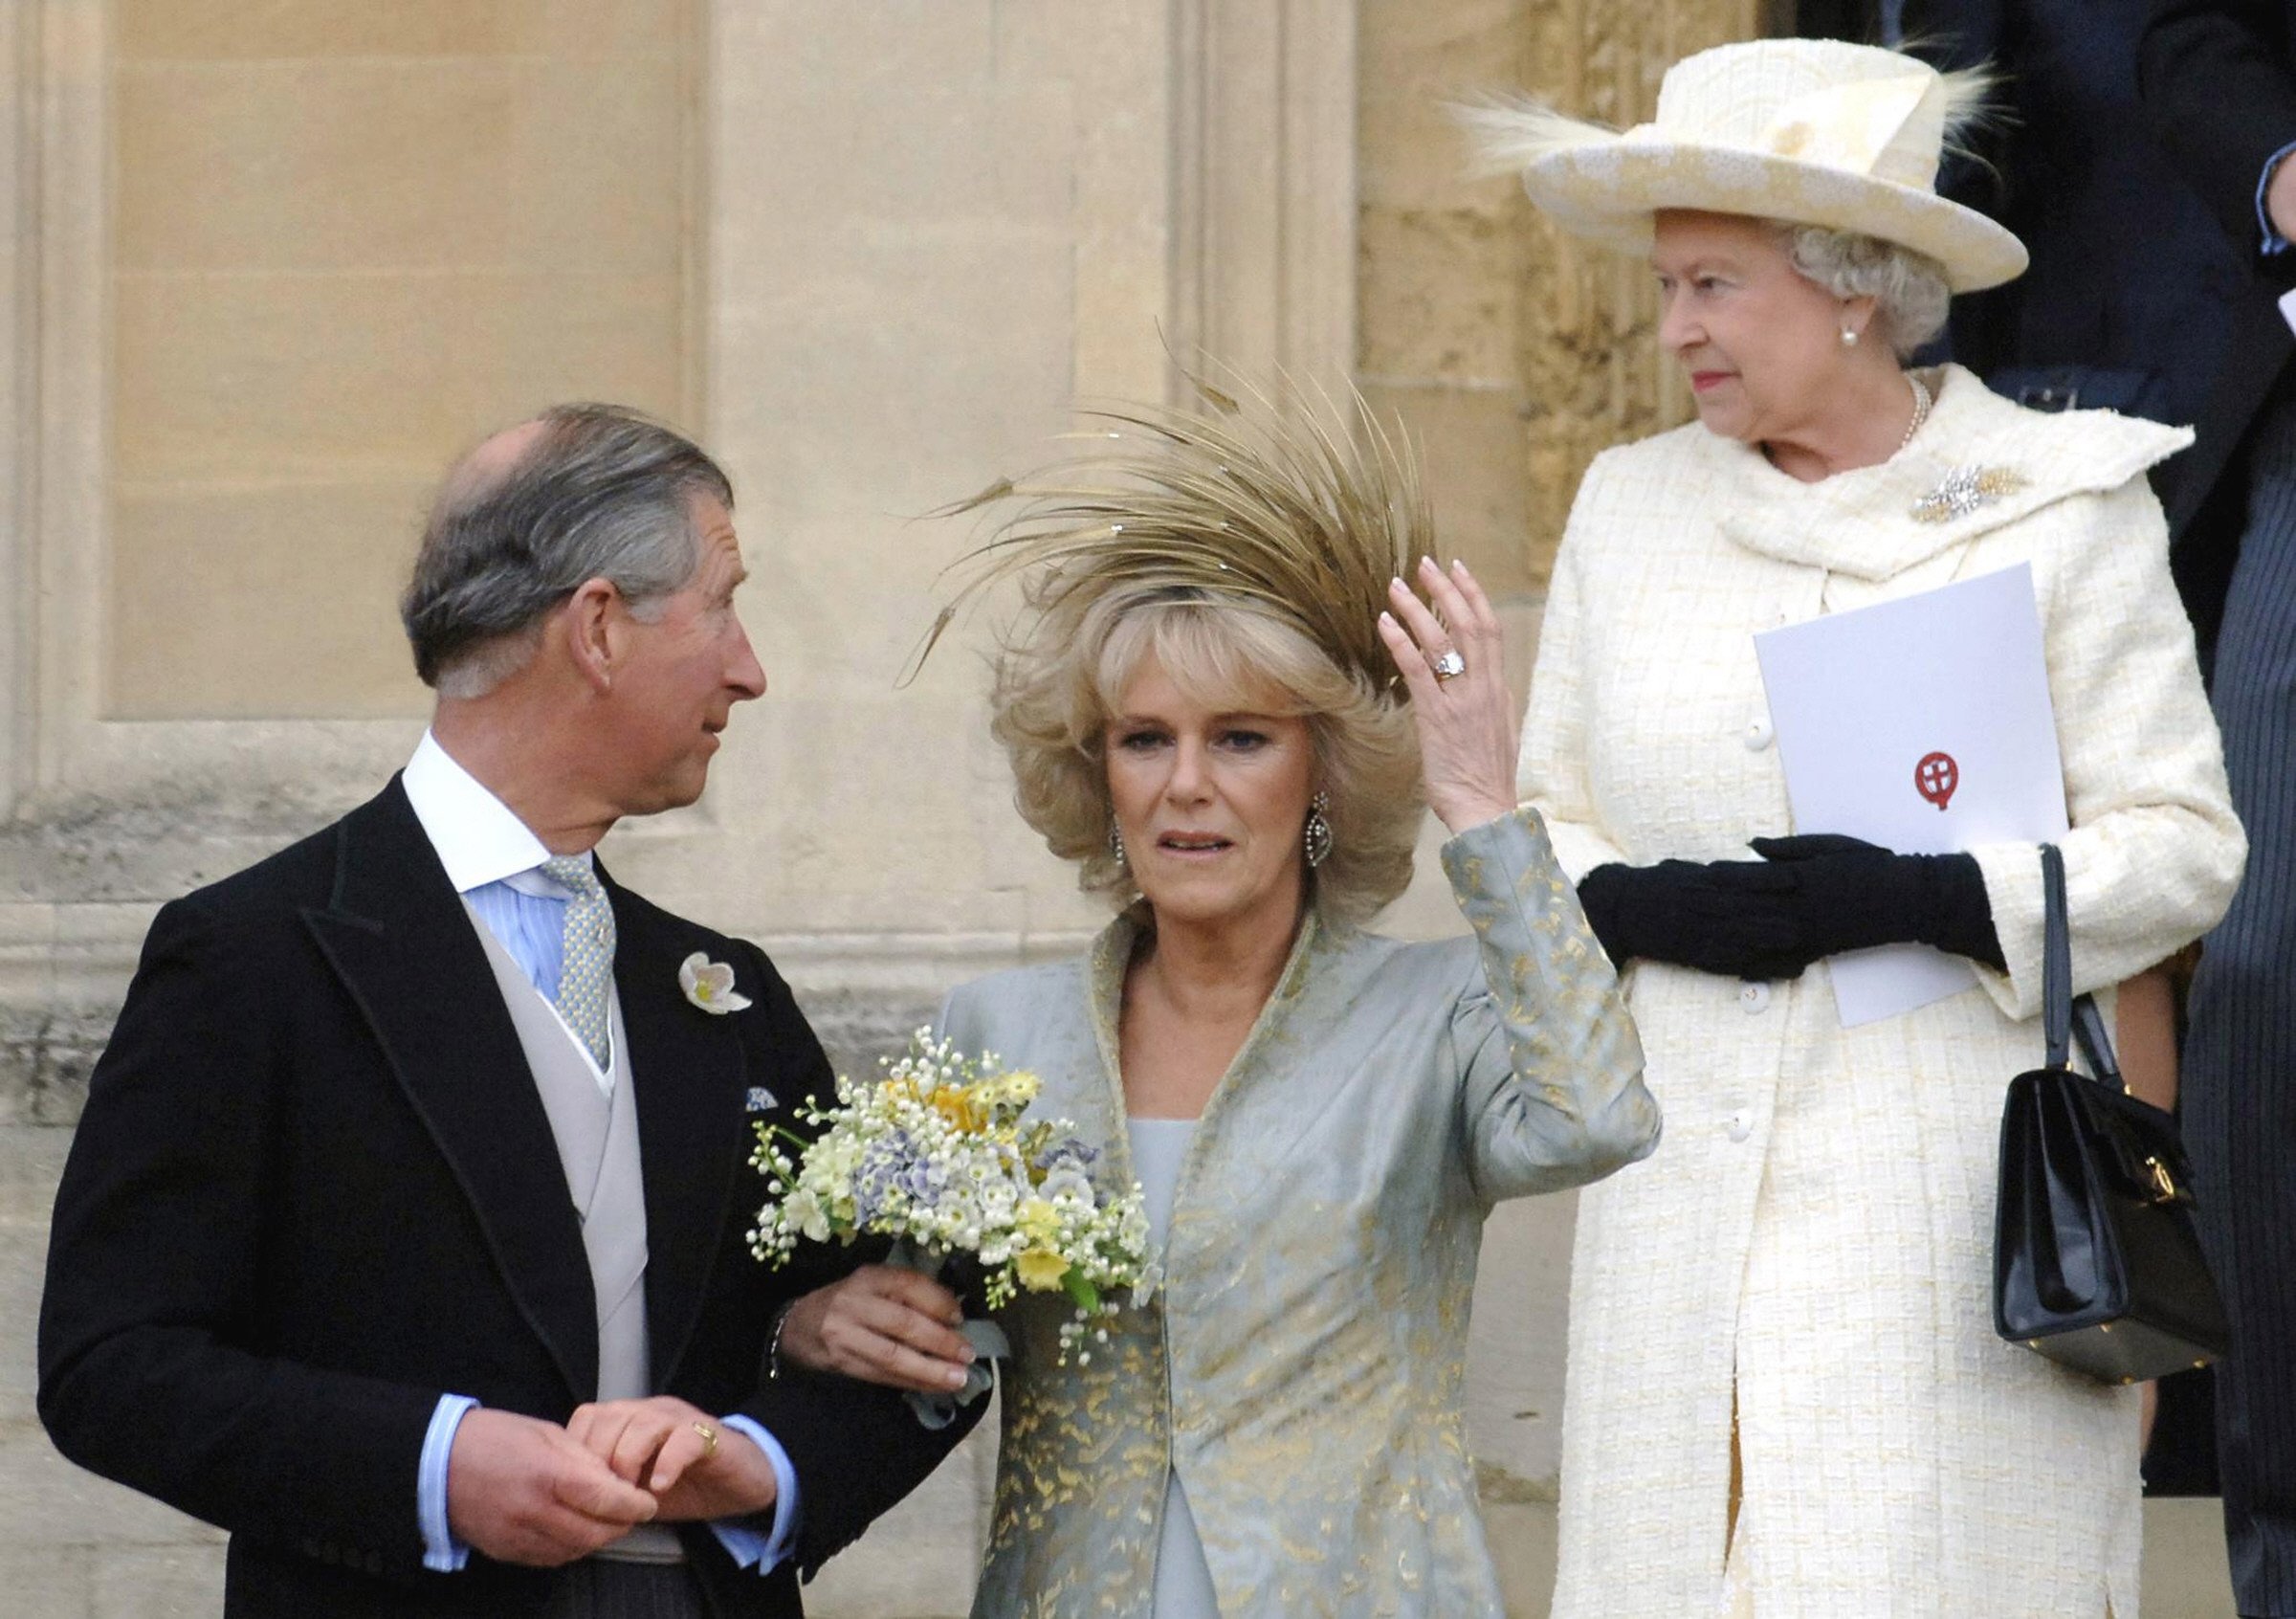 Prince Charles, Camilla Parker Bowles, and Queen Elizabeth Leaving St. George's Chapel following marriage blessing